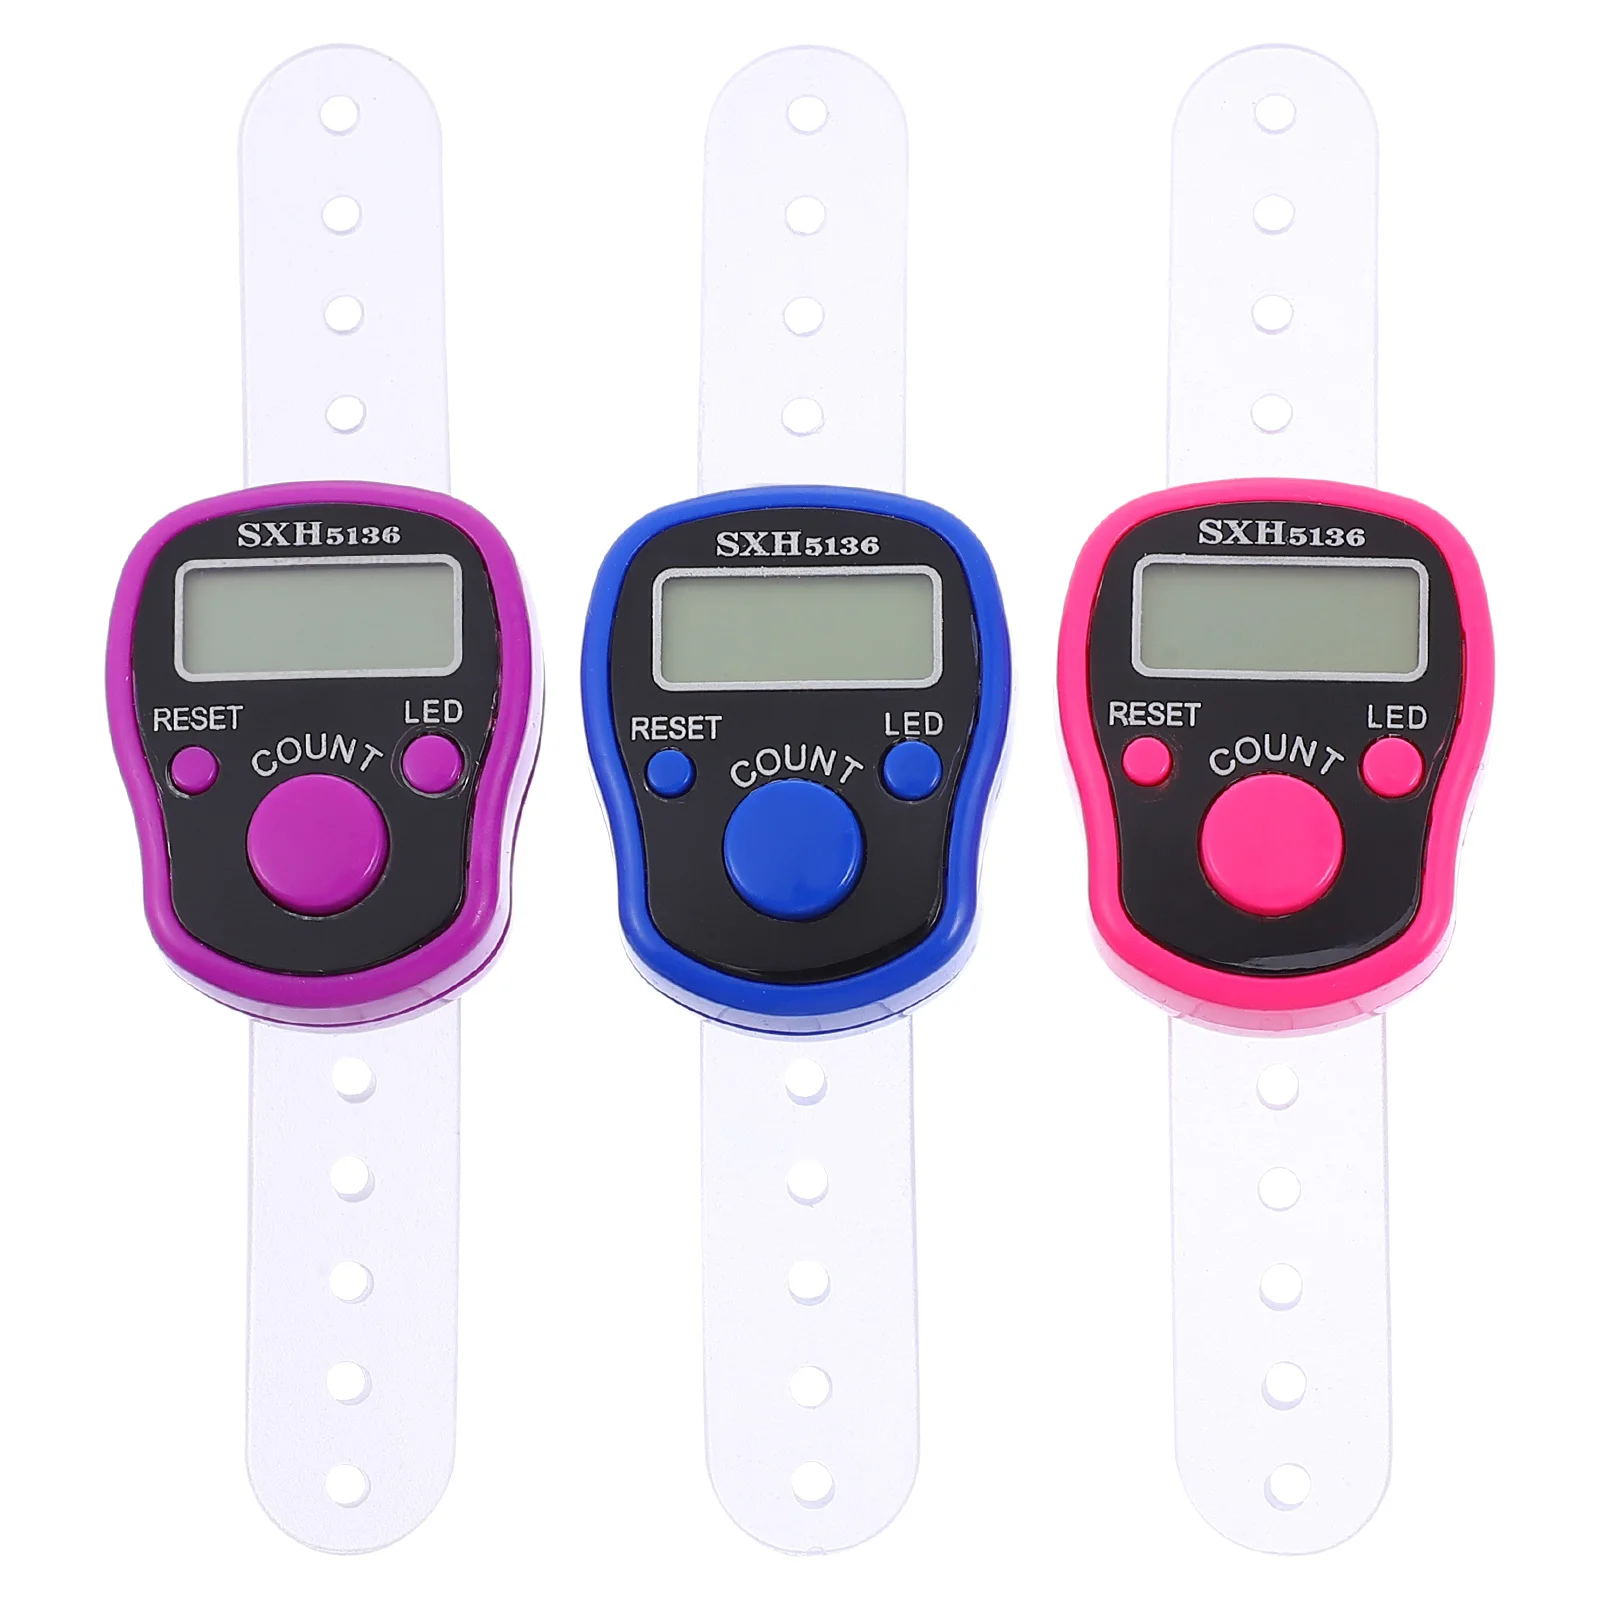 

3 Pcs Counter Electronic Resettable Digital Tally Hand Finger Handheld Intelligent